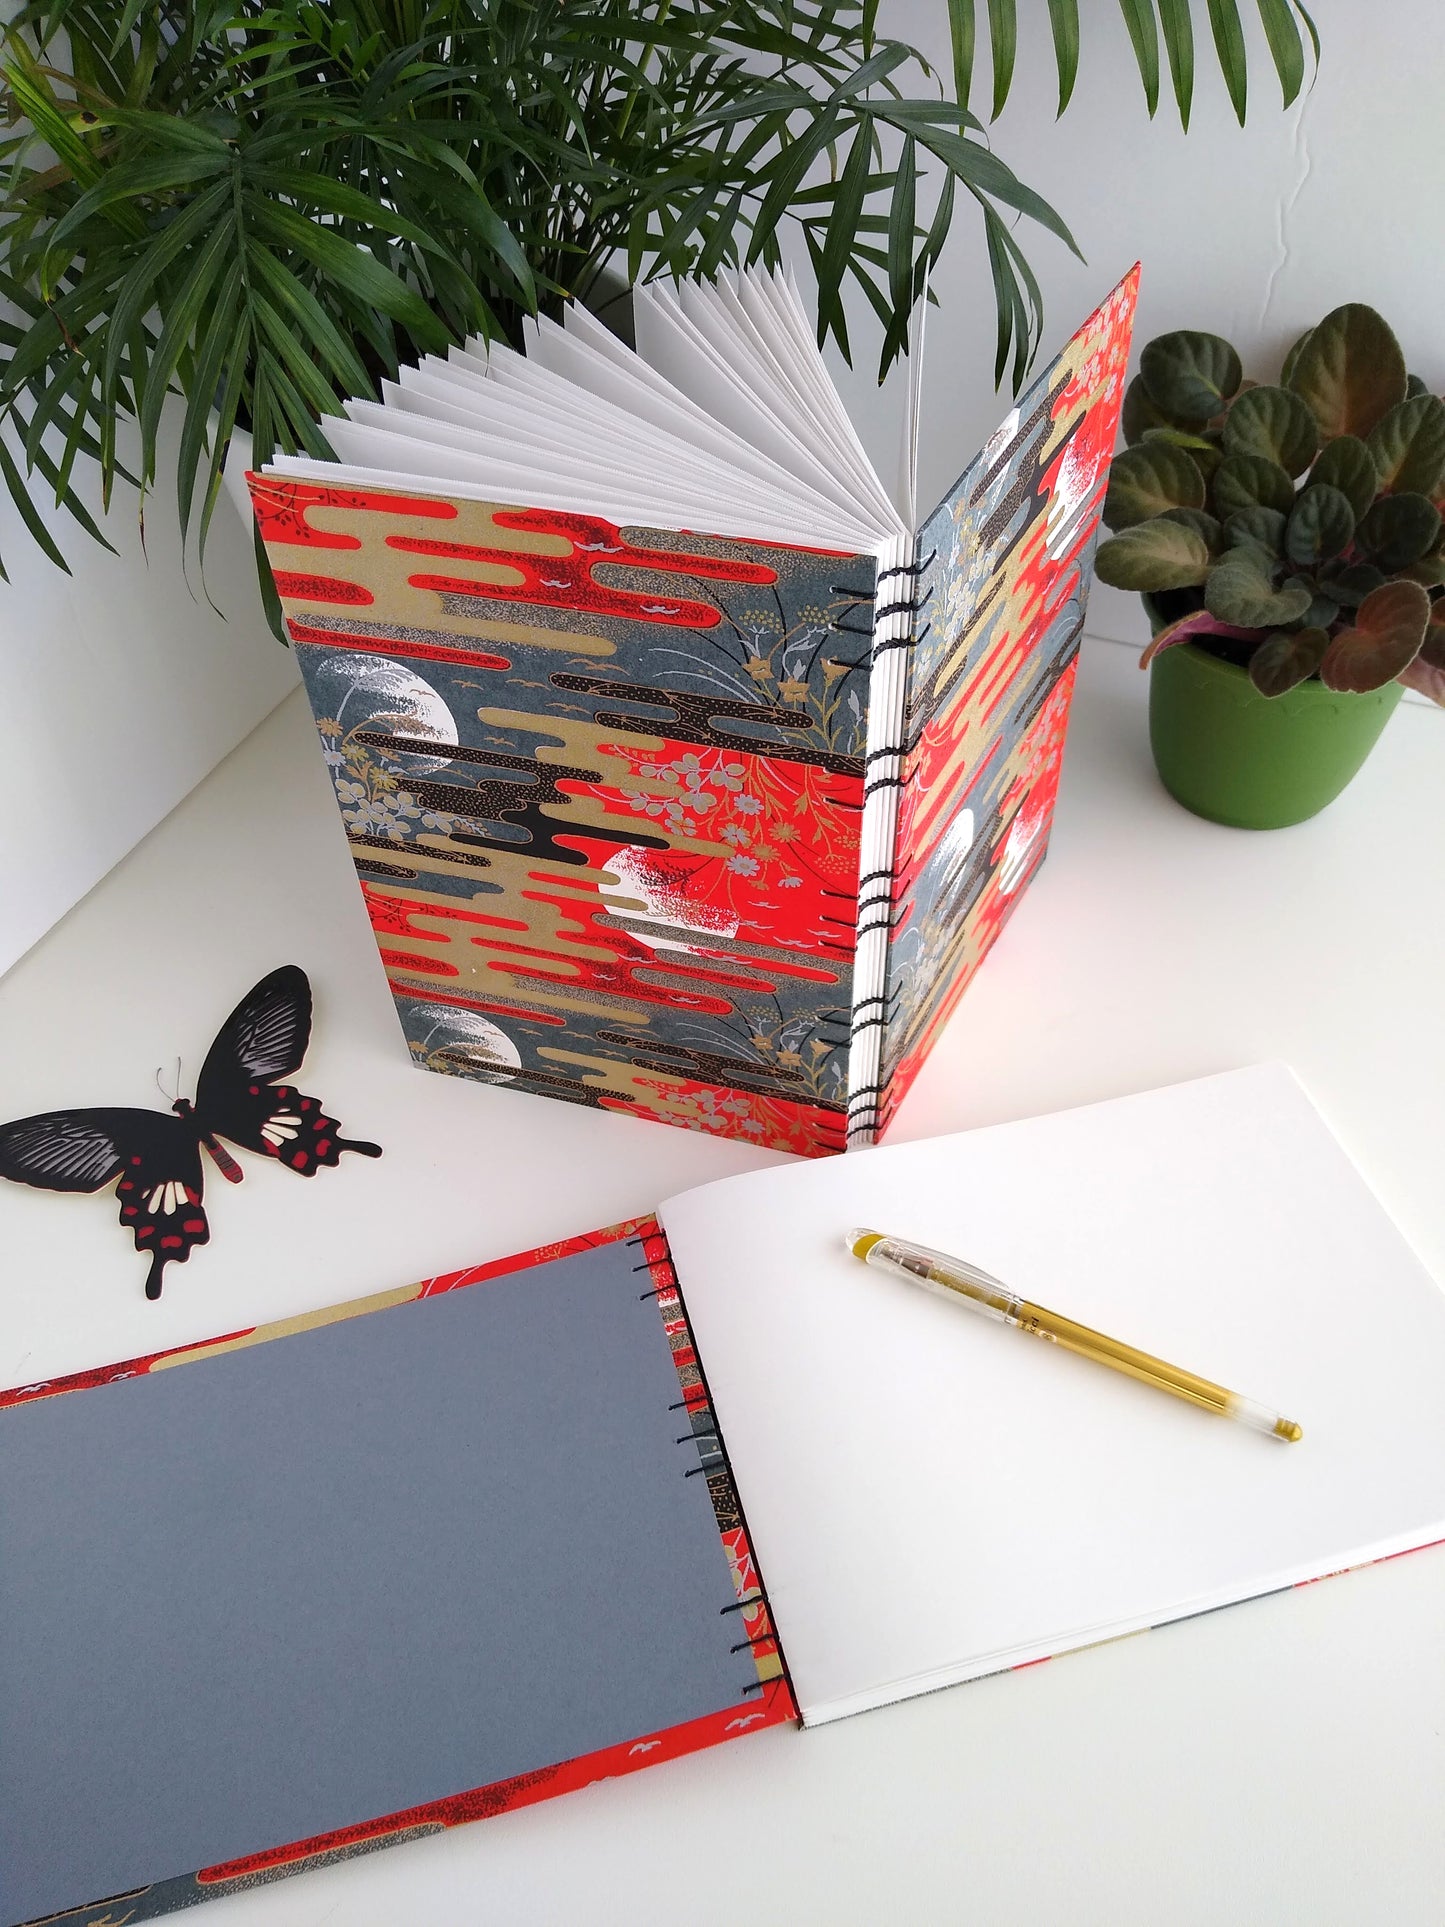 Two handmade journals are positioned beside two potted plants and a paper butterfly. One is laying flat and the other is standing upright. The one laying flat is opened, showing the grey endpaper and has a gold pen laying on the blank white pages. The cover of the journals are complete scenes with red and grey skies with partial moon outlines, flowers, birds, and gold and black stylized clouds. The upright journal is angled to show its open spine and black thread stitching it together.